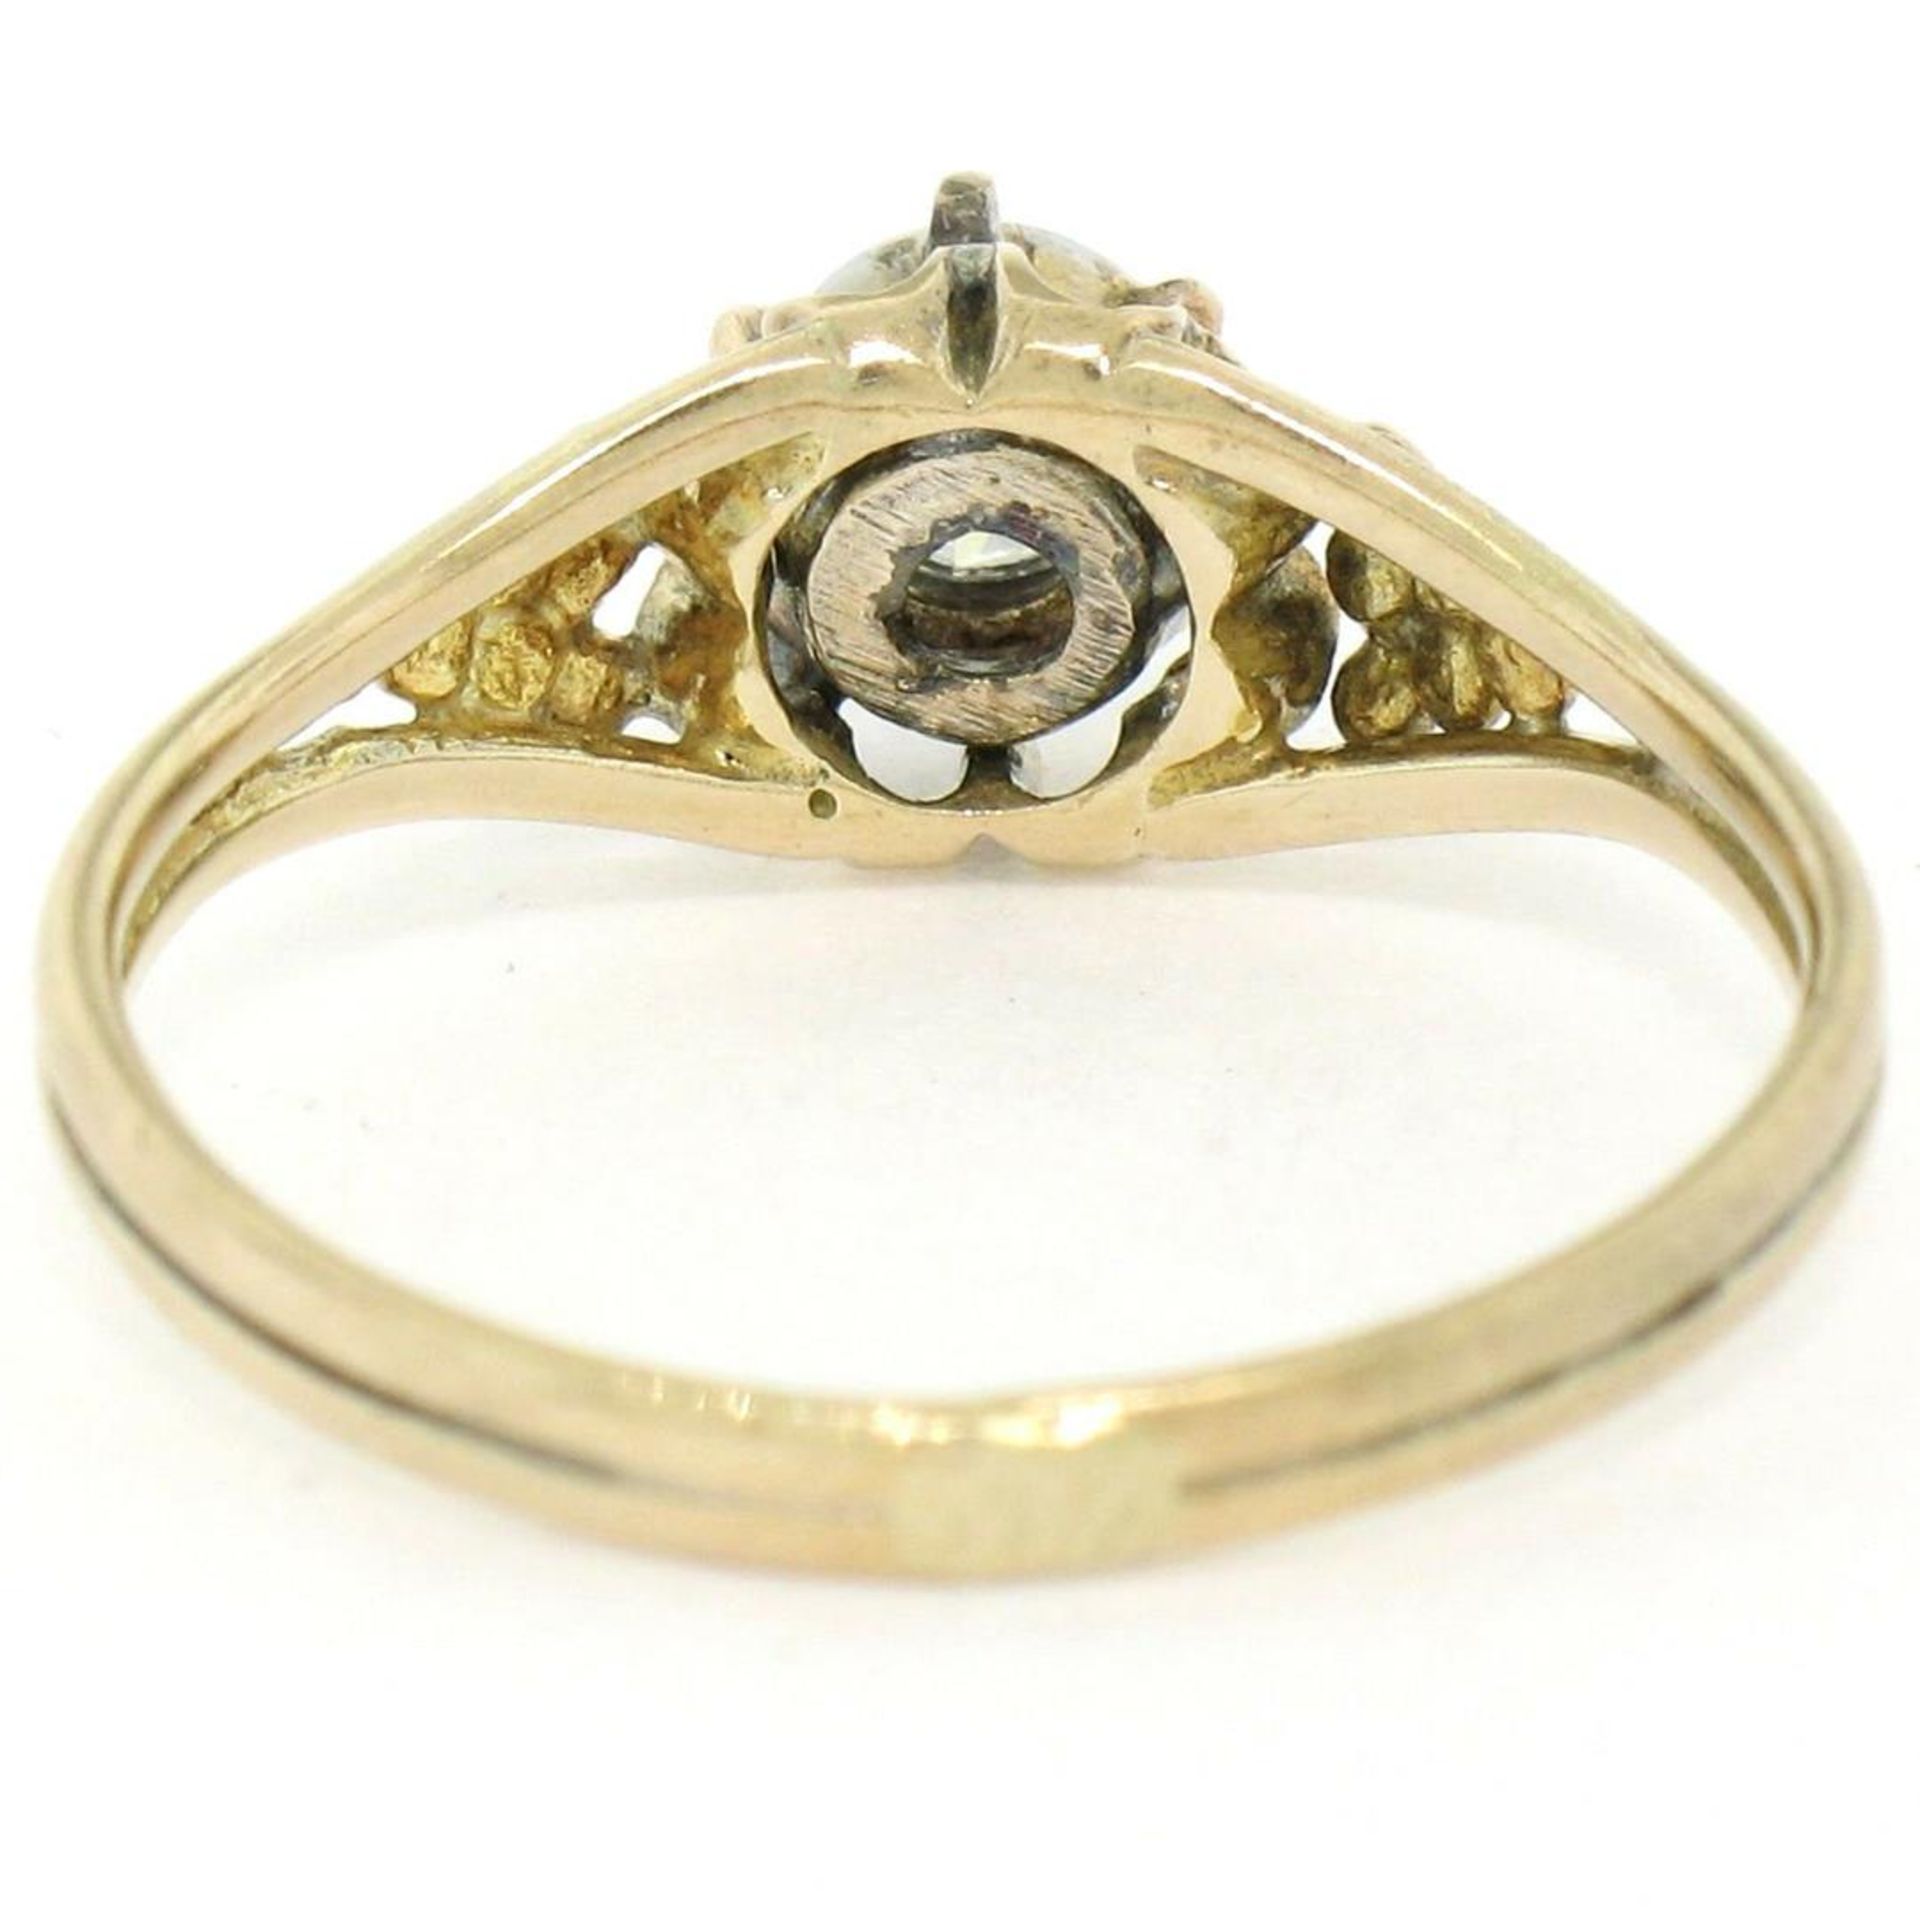 Antique 14kt Yellow and White Gold 0.30 ct Diamond Solitaire Ring - Image 6 of 8